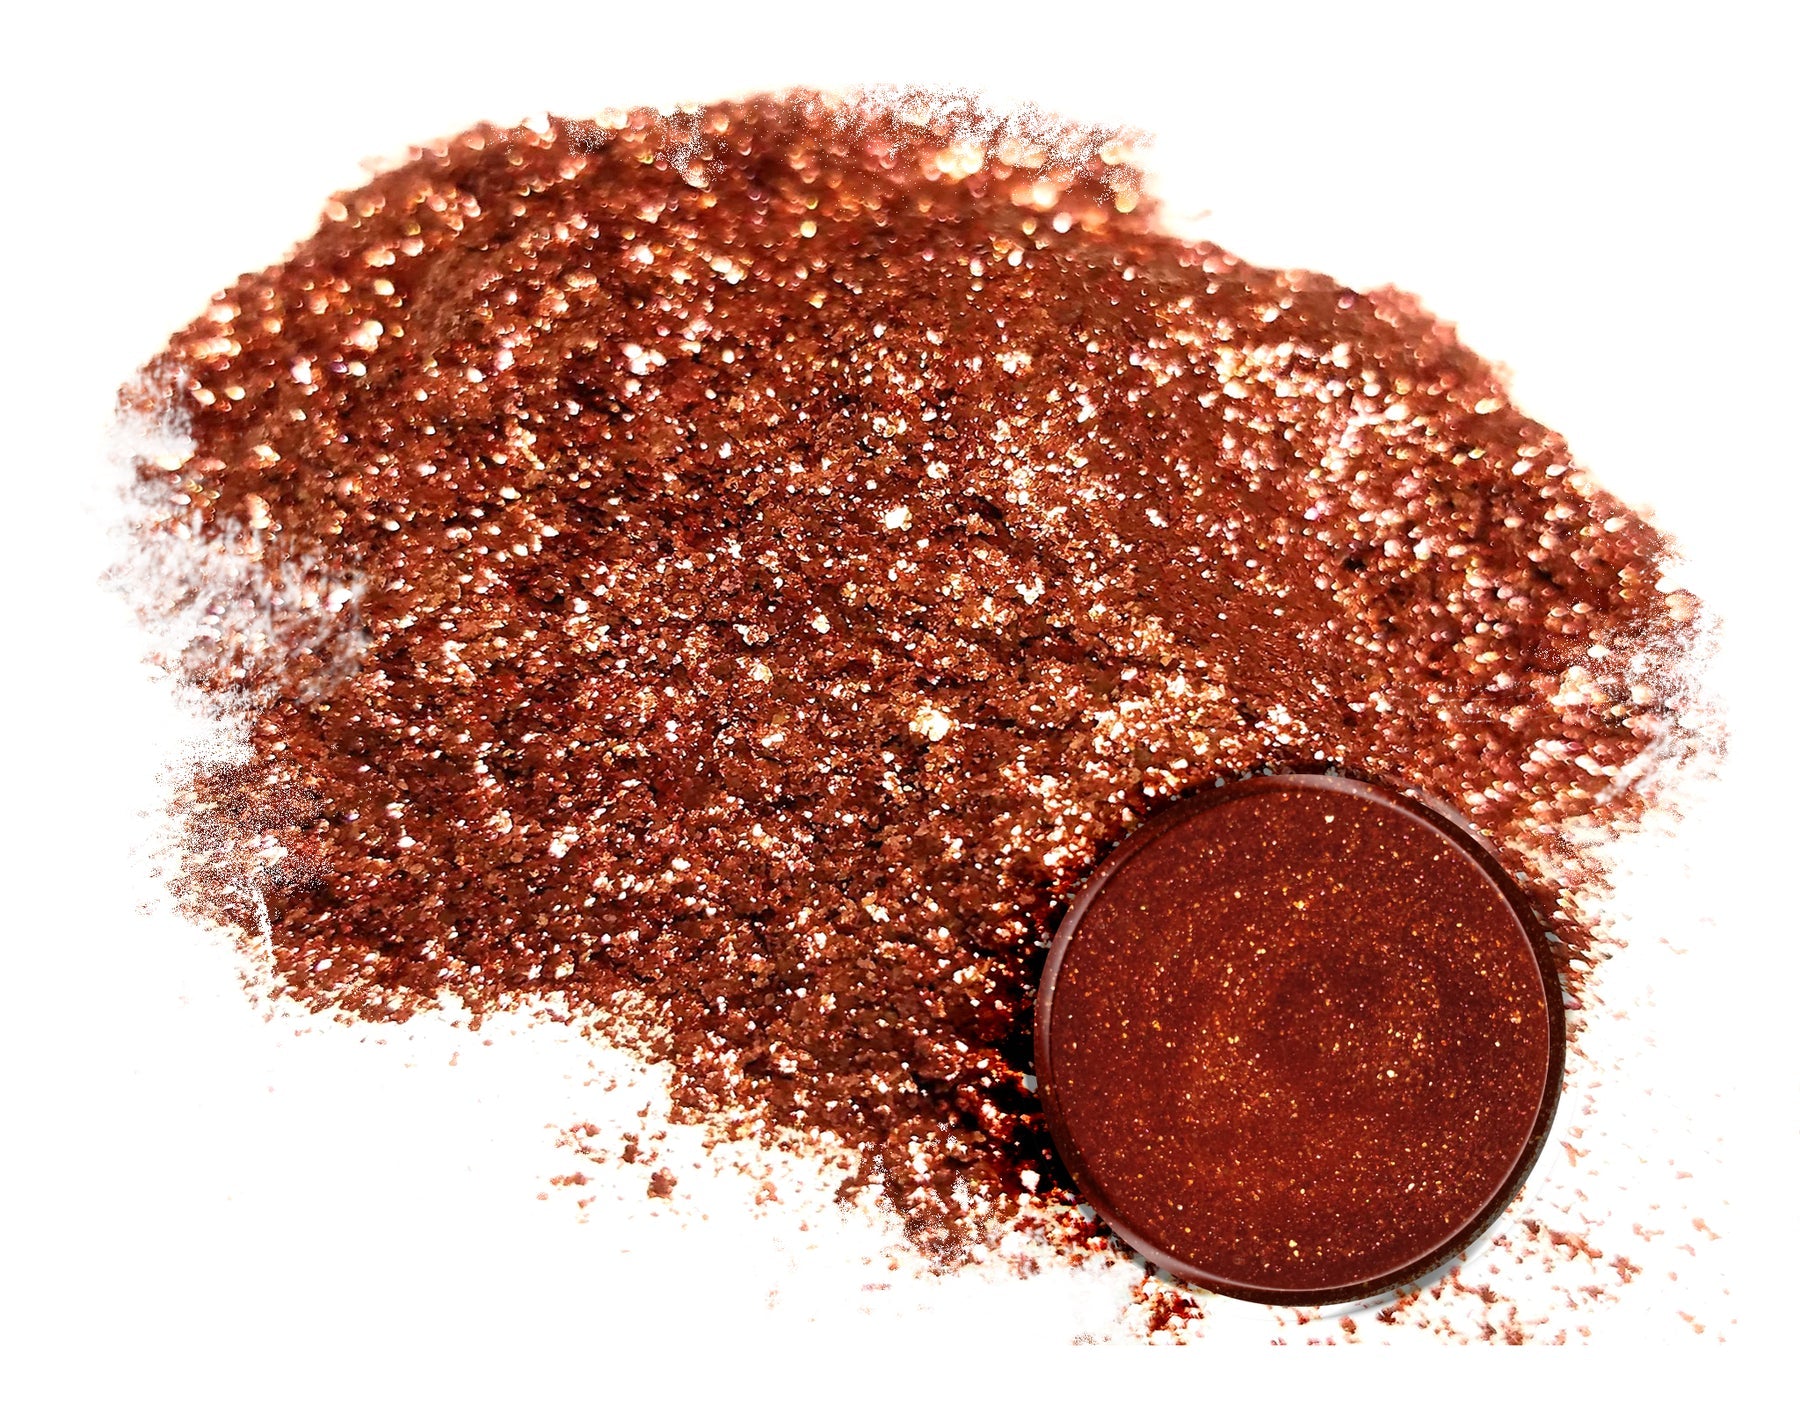 Powdered pigment by eye candy pigments for epoxy resin projects. In the color Penny Copper.